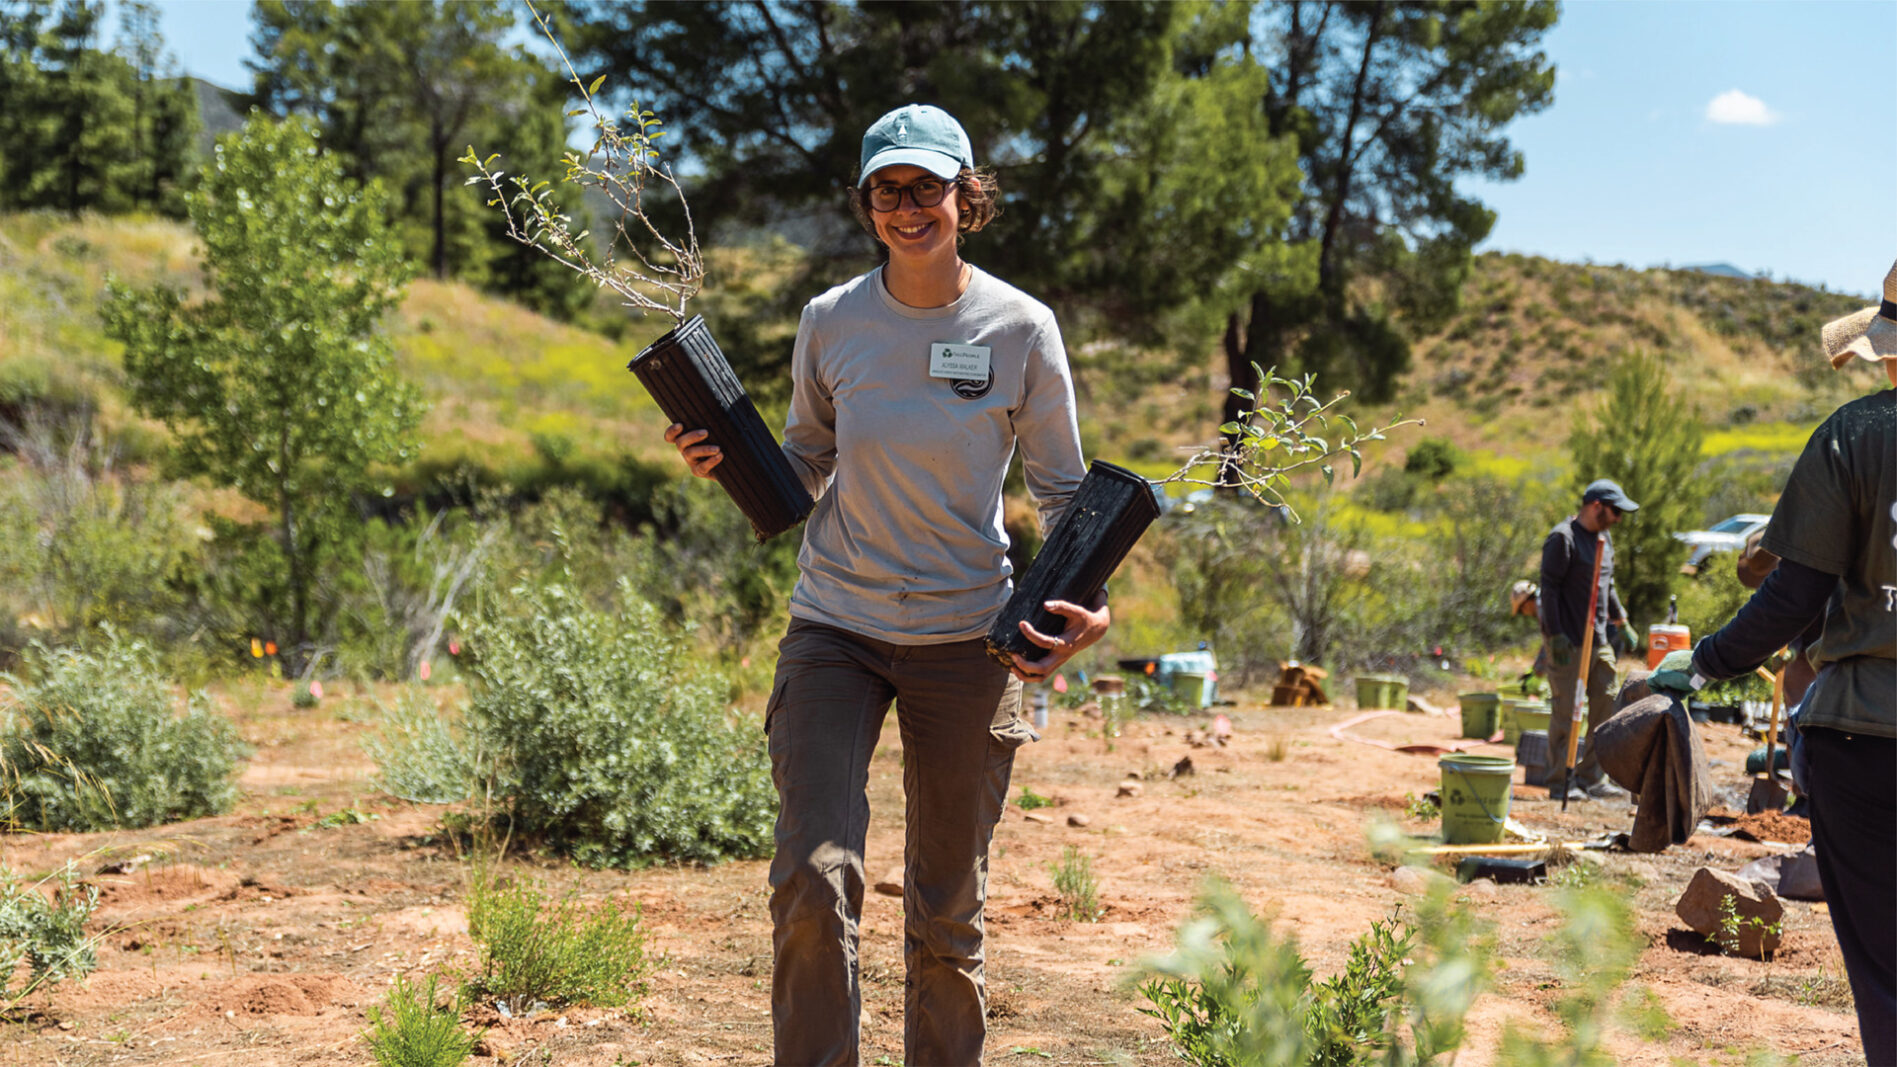 What career plants trees in the national forests